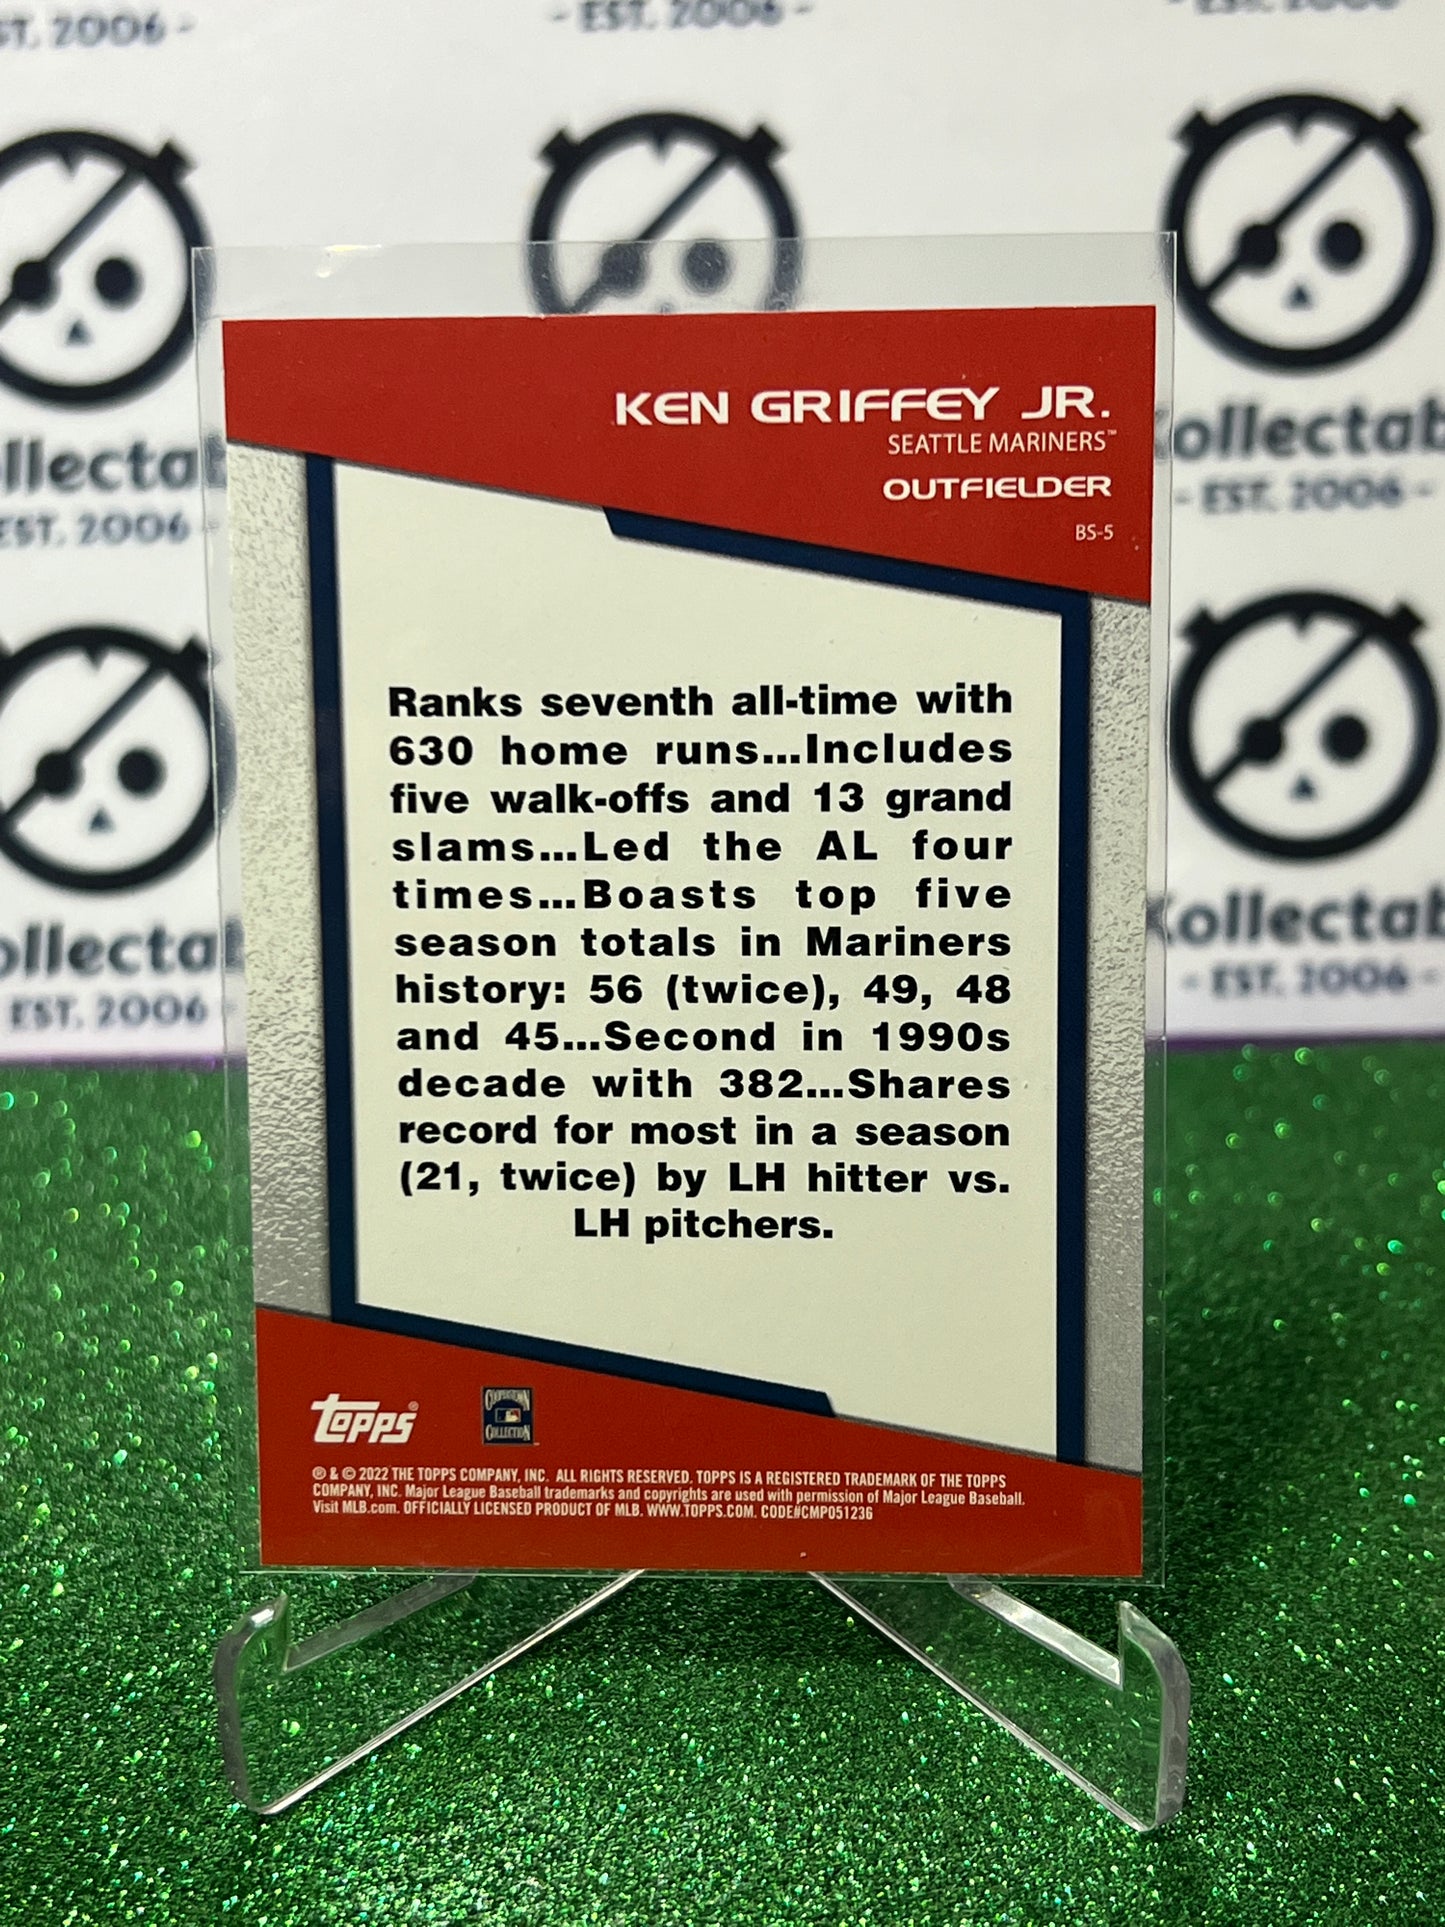 2022 TOPPS OPENING DAY KEN GRIFFEY JR. # BS-5  BOMB SQUAD SEATTLE MARINERS BASEBALL CARD